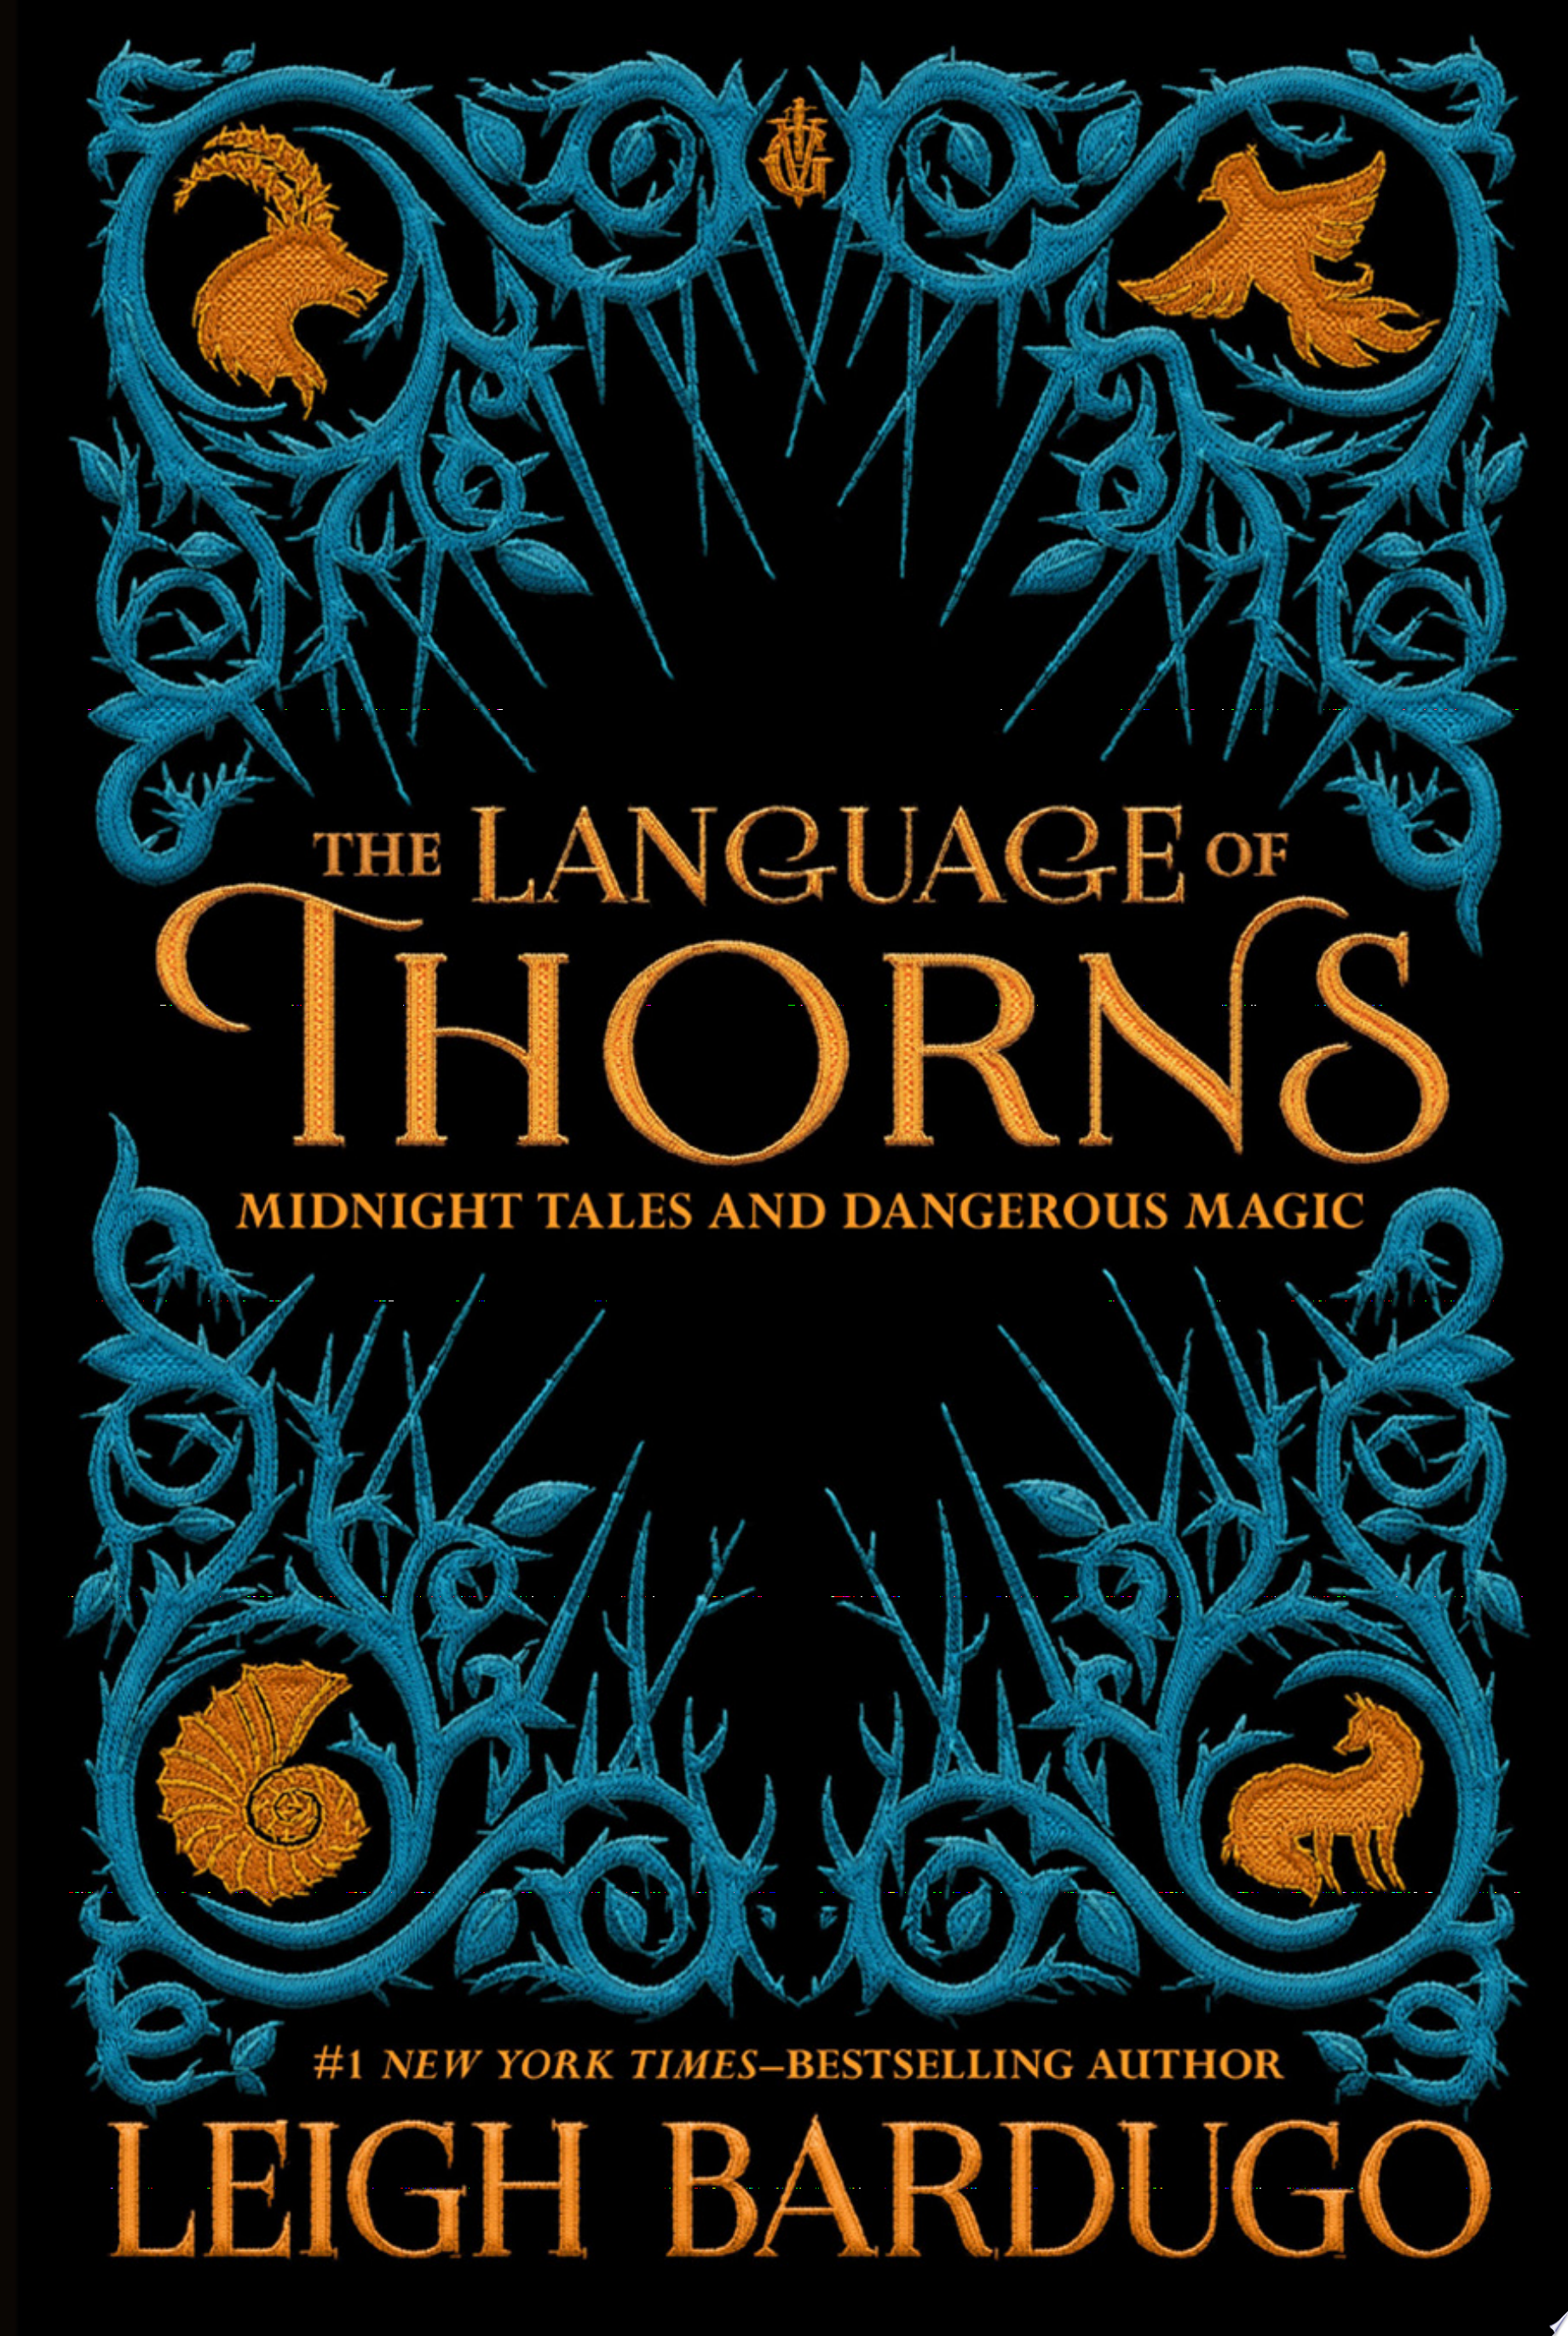 Image for "The Language of Thorns"